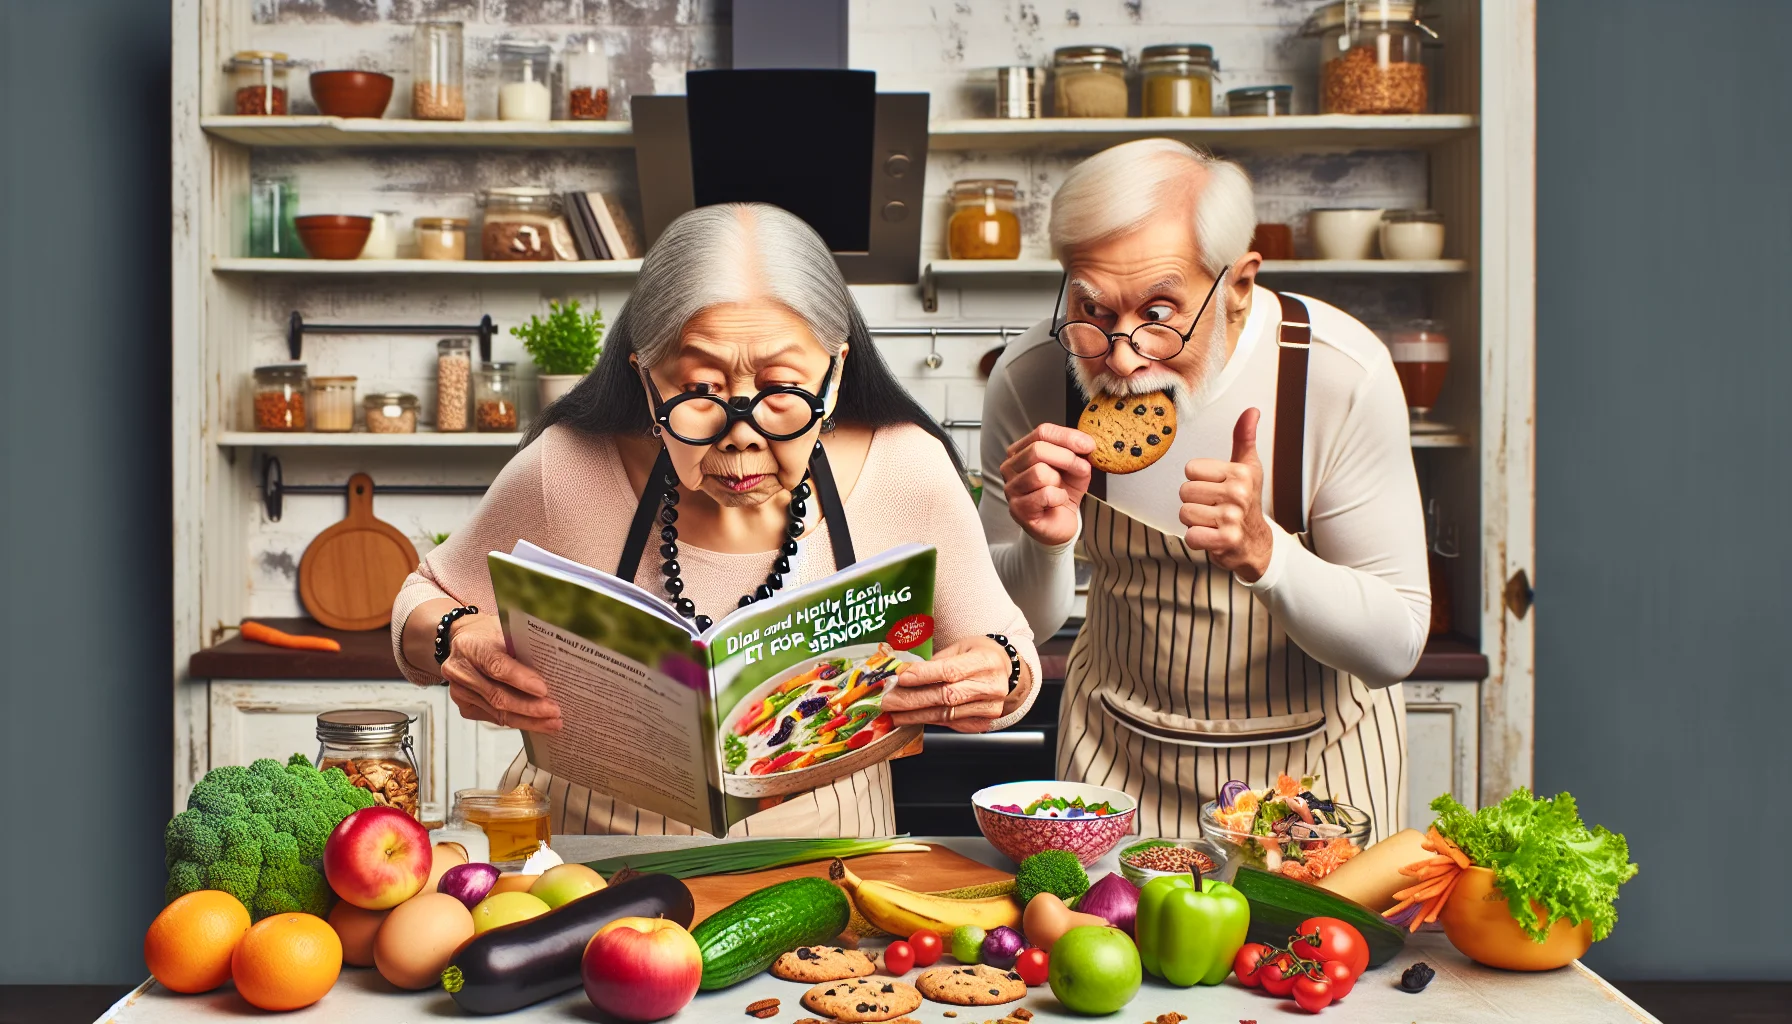 Imagine a humorous, realistic scene of an elderly South Asian woman cooking. She wears eyeglasses hanging down on her chest with a bead chain, and she's attempting to navigate through an oversized cookbook titled 'Diet and Healthy Eating for Seniors'. The kitchen countertop is a chaotic array of colorful, healthy ingredients including fruits, vegetables, and whole grain items. In the corner of the room, an elderly Caucasian man, her husband, is sneakily eating a cookie while trying to distract her with a thumbs up. Both are wearing aprons, and there's a noticeable contrast between the chaos of preparation and the sneaky indulgence.